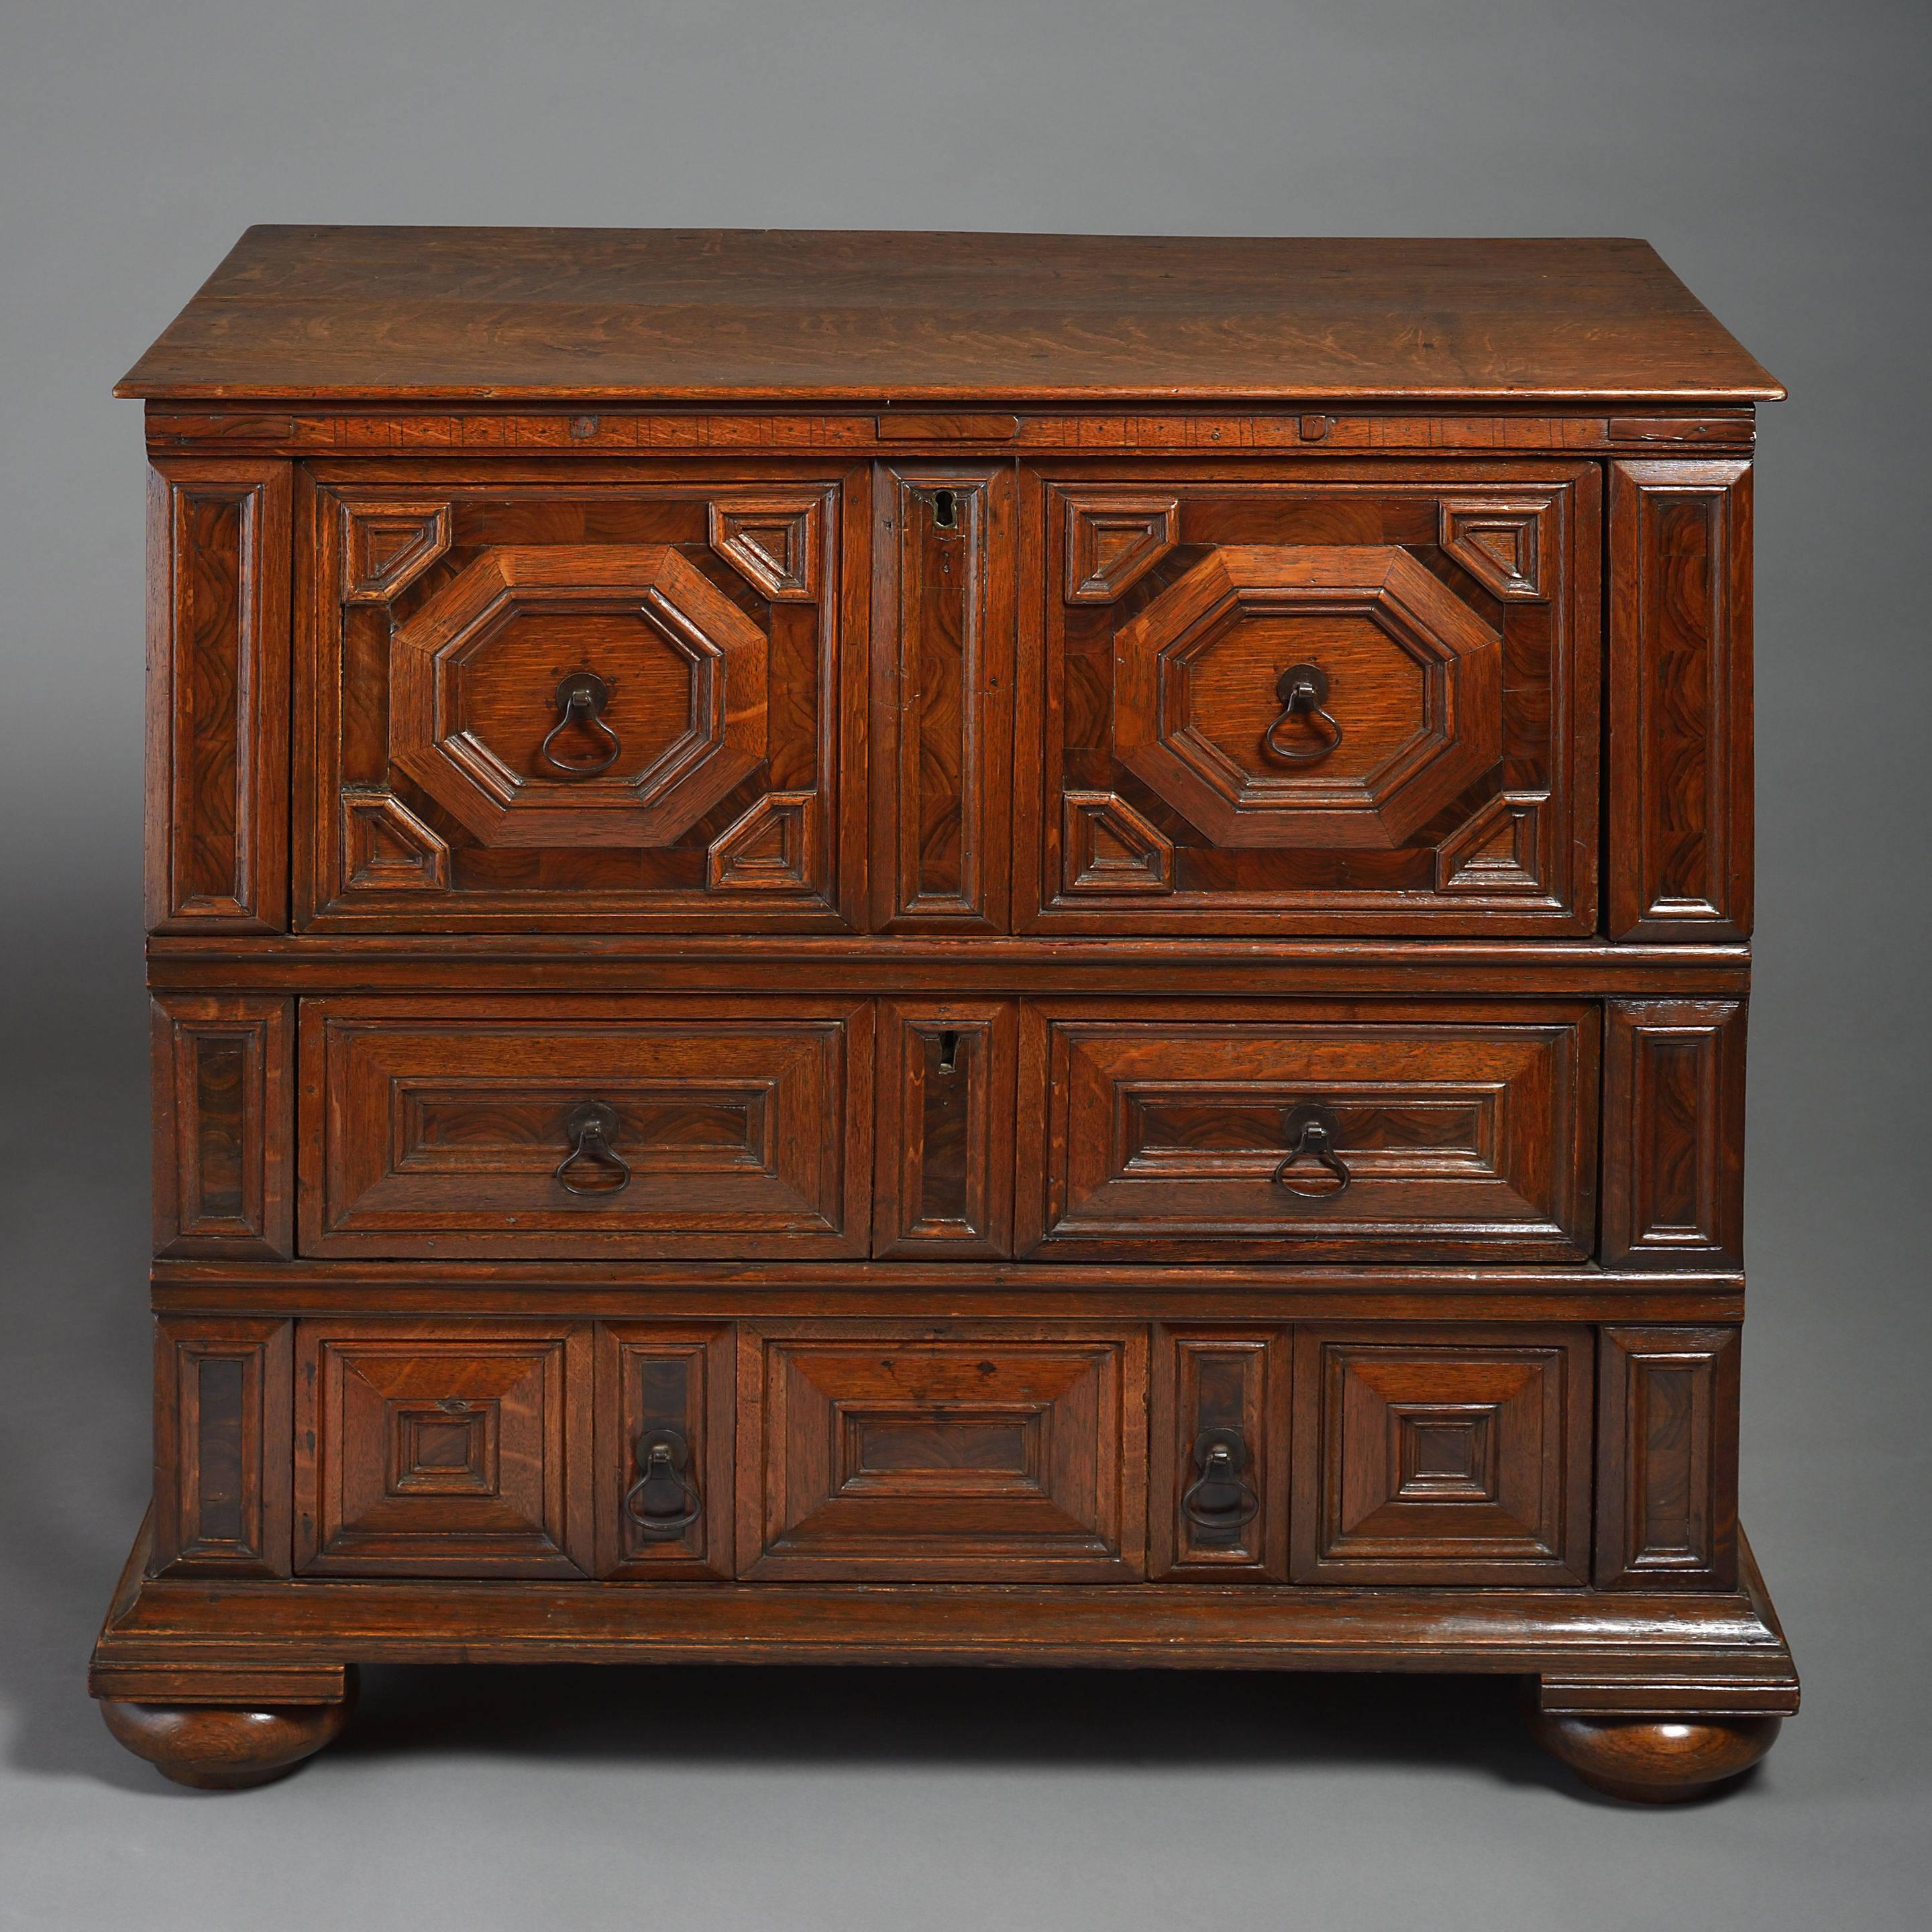 A late 17th century Charles II period oak chest, the overhanging top above three graduated drawers with geometric mouldings and olivewood veneers, all retaining the original handles and raised on bun feet.

This chest in constructed in two halves,